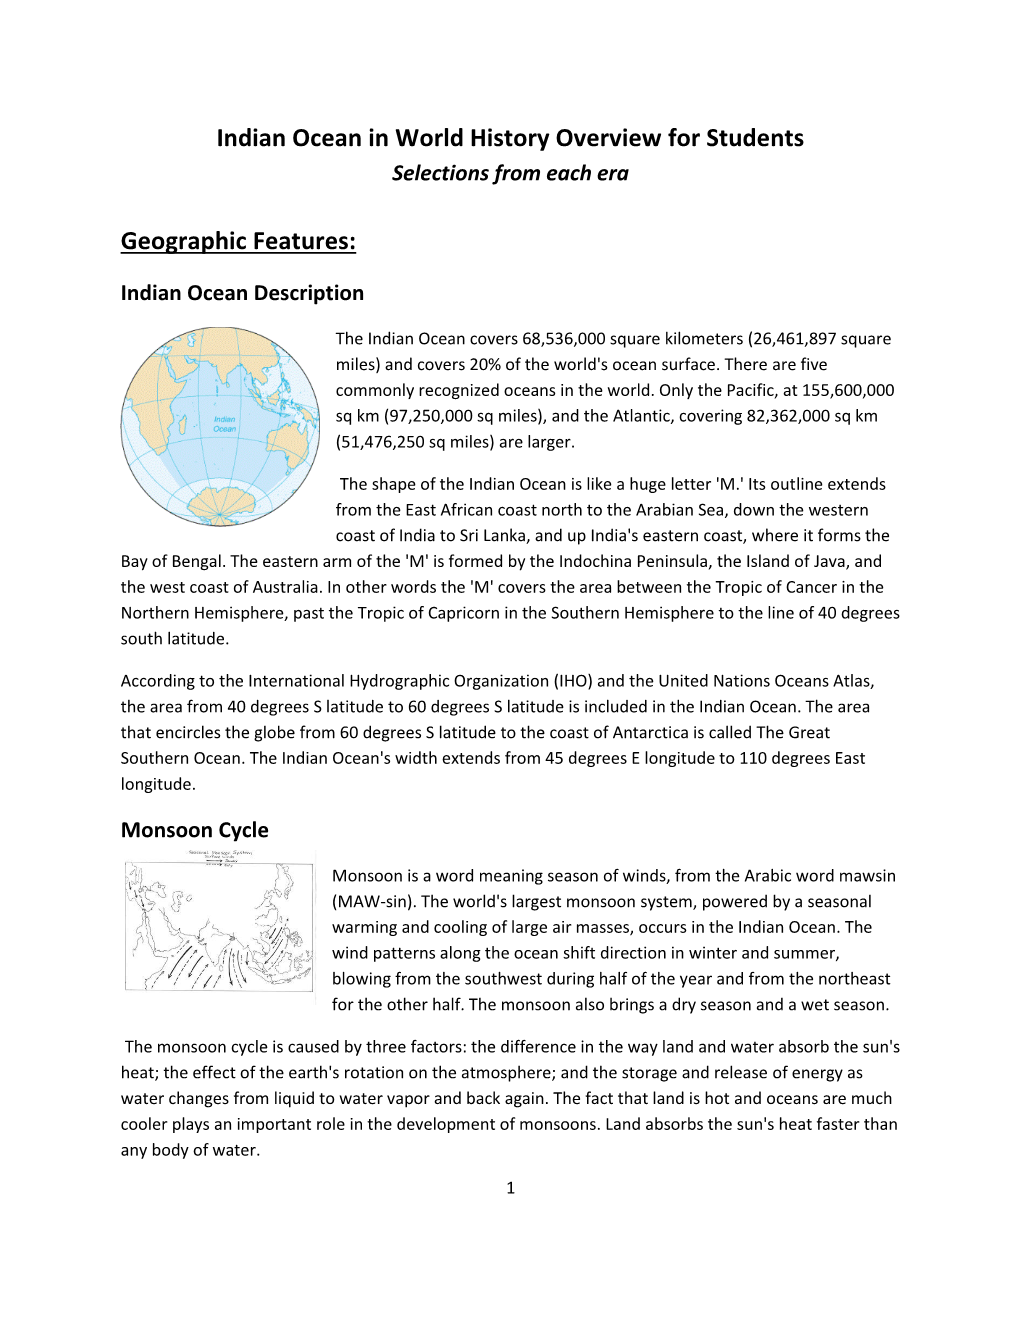 Indian Ocean in World History Overview for Students Geographic